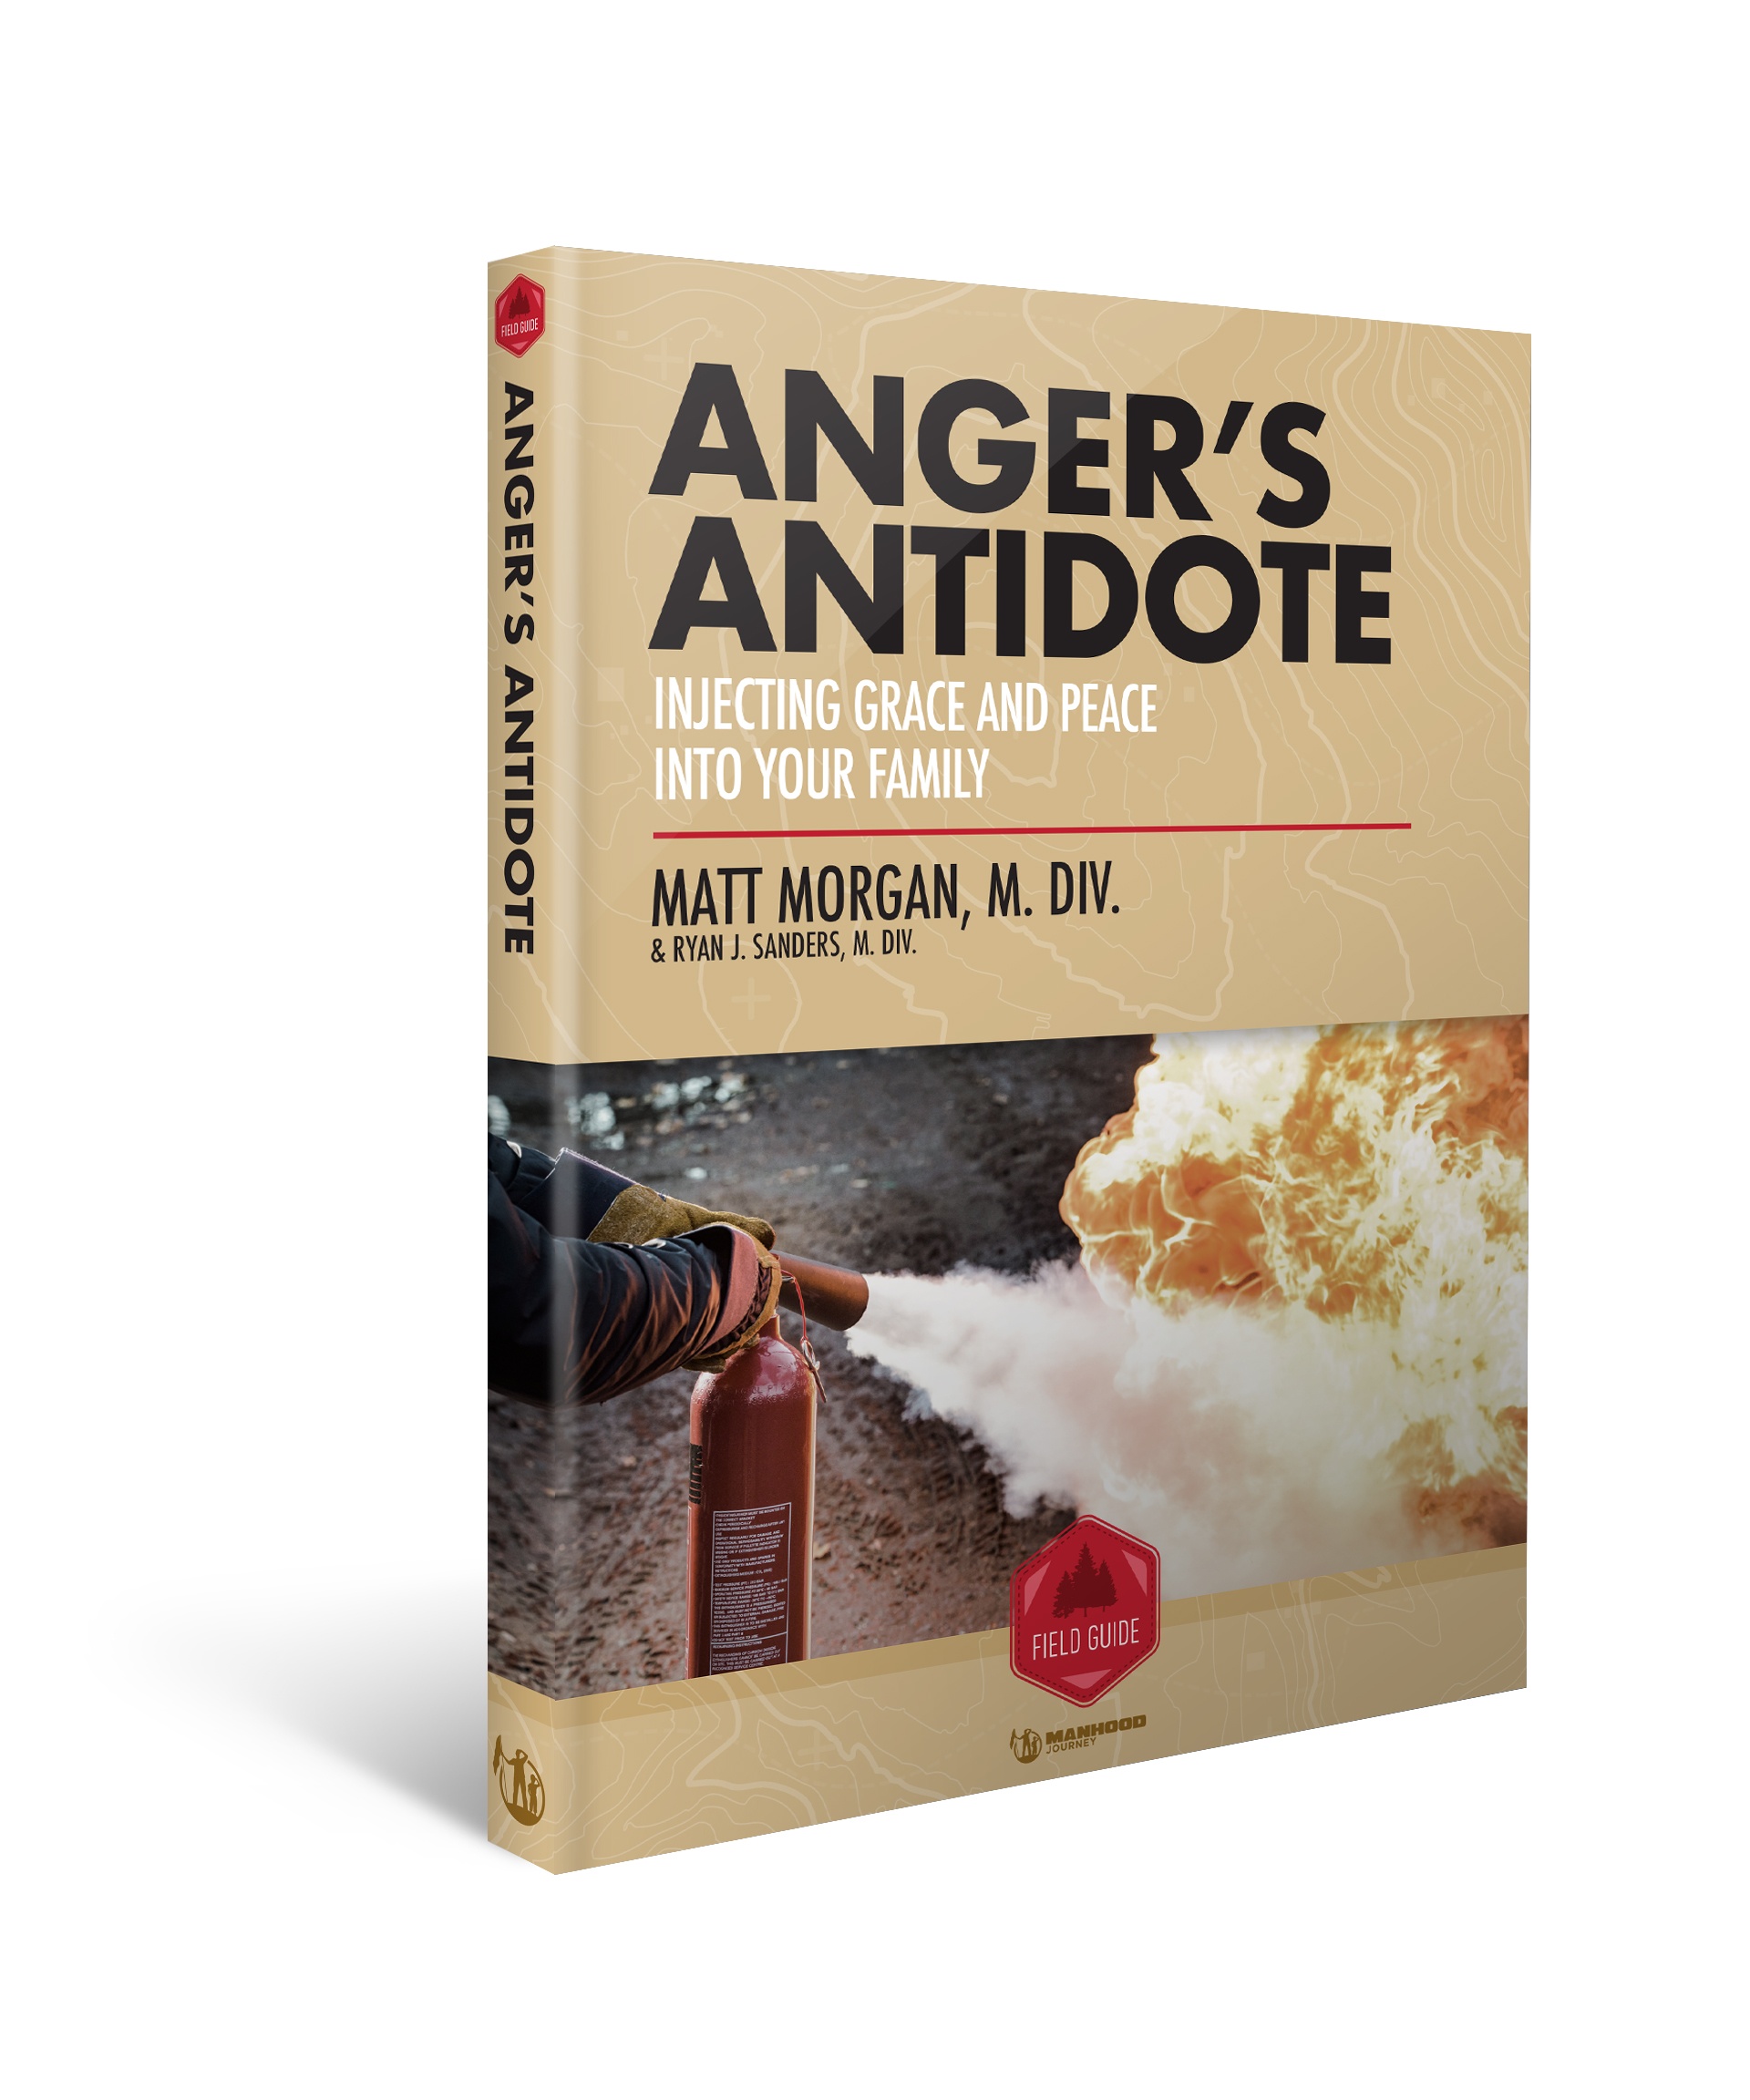 FG-ANGERS ANTIDOTE-3D